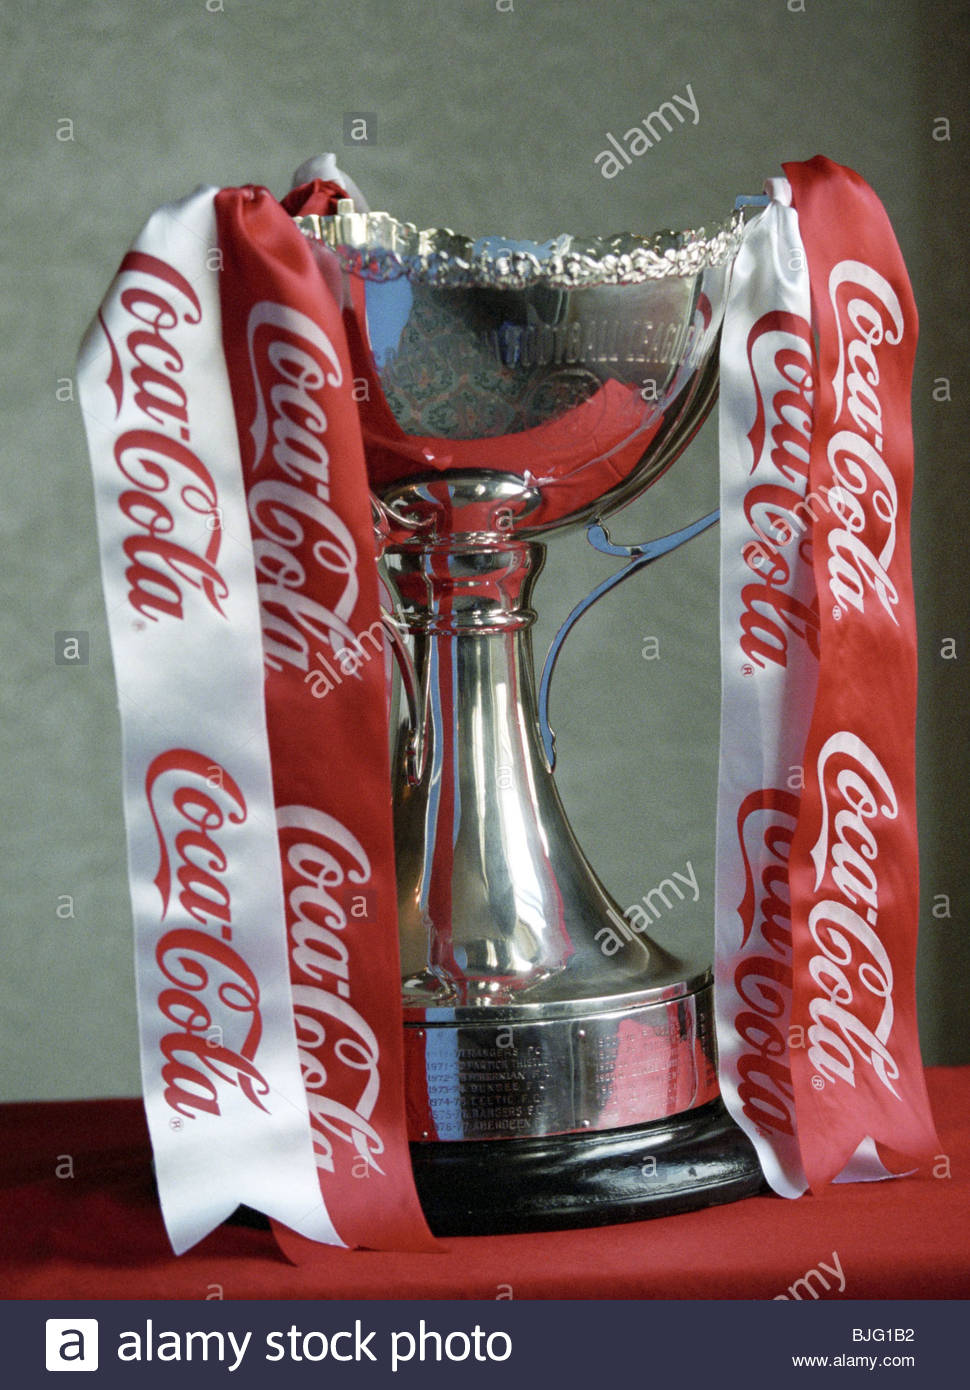 NationStates • View topic - The Coca-Cola Cup (Soccer)